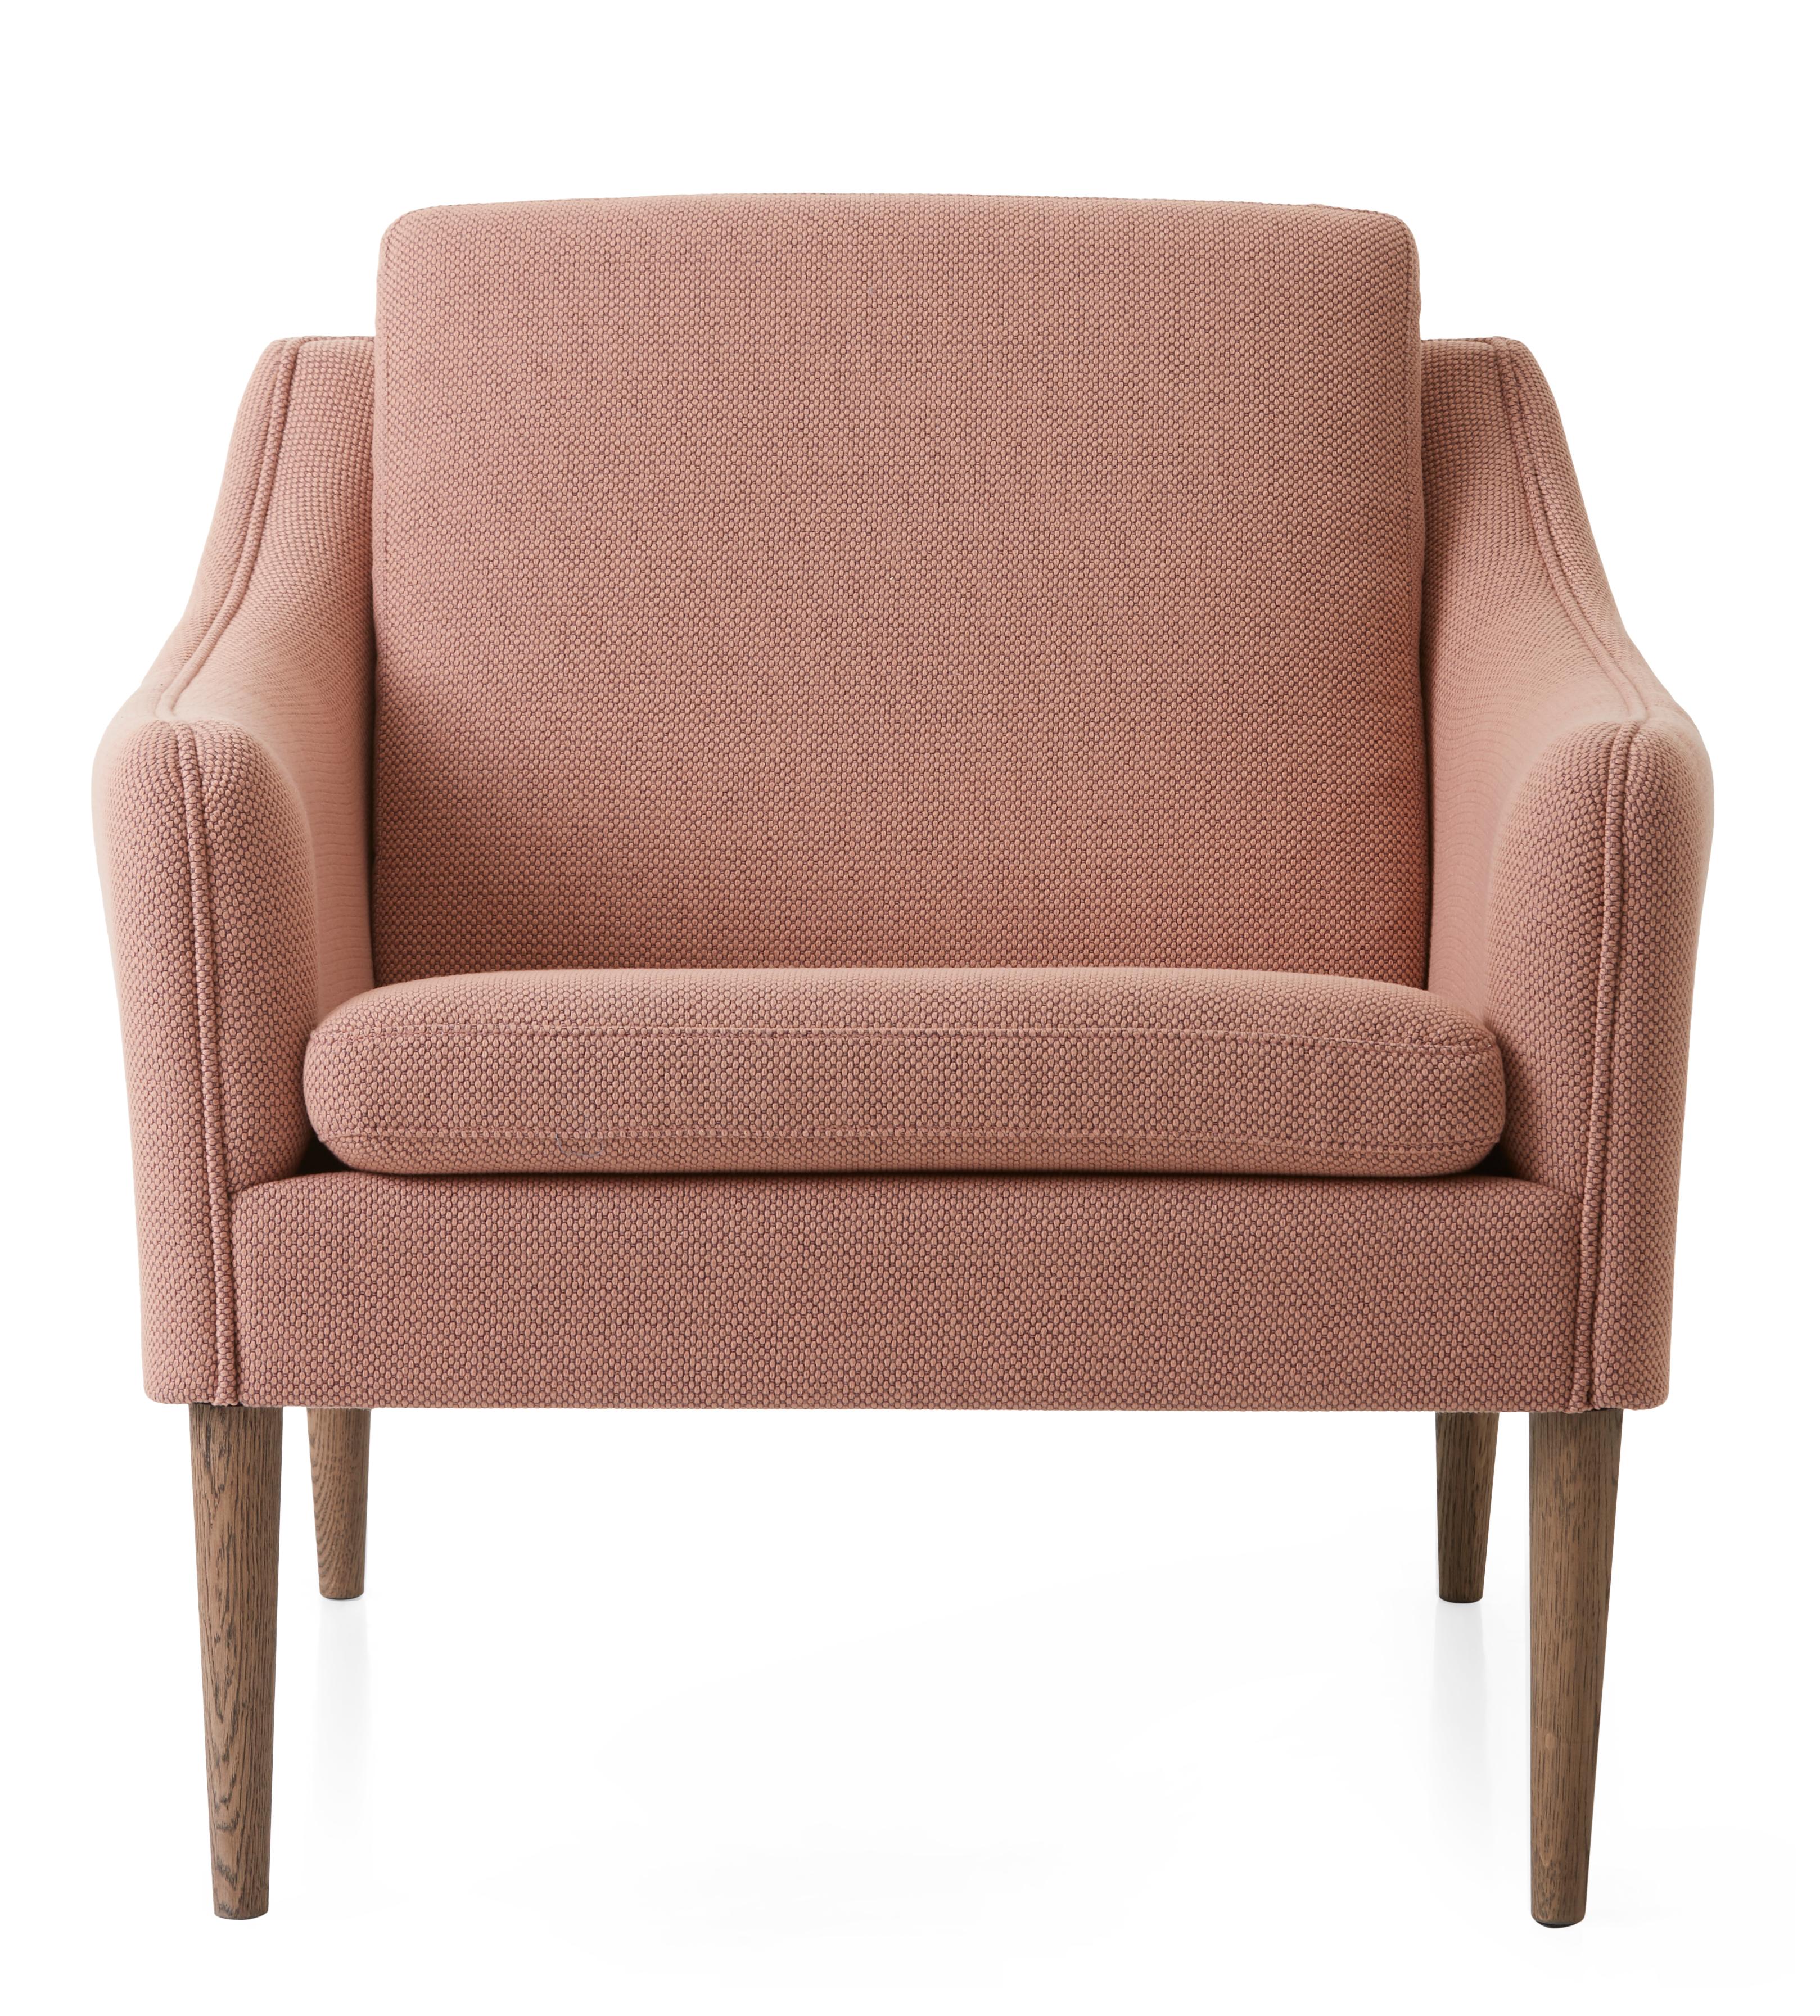 For Sale: Pink (Merit 035) Mr. Olsen Lounge Chair with Smoked Legs, by Hans Olsen from Warm Nordic